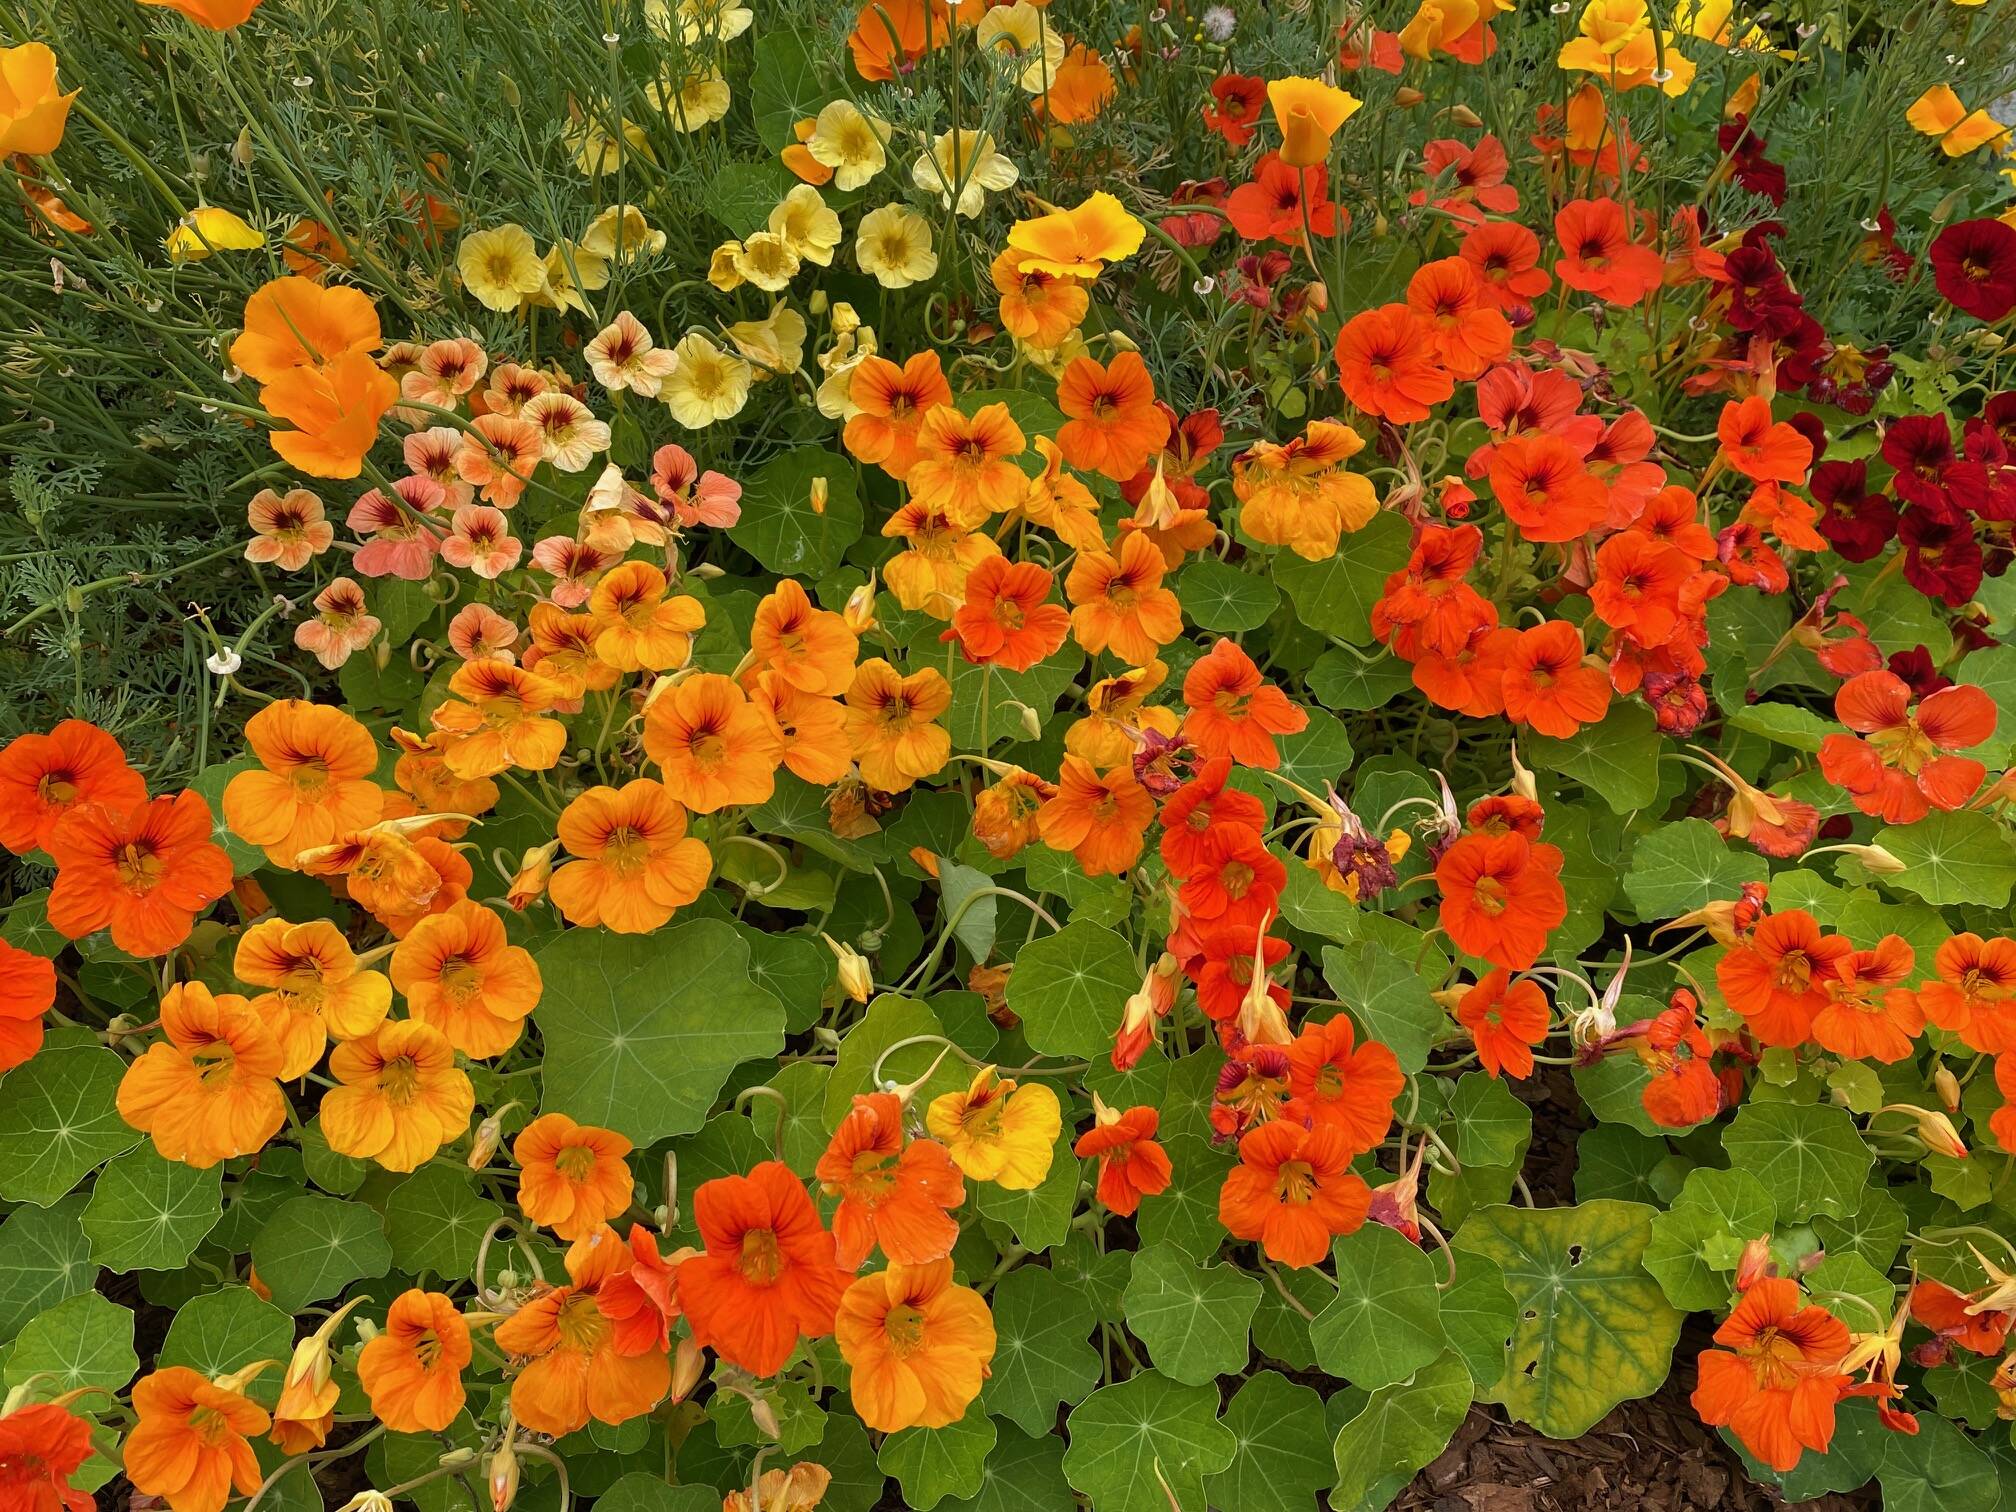 Eye-catching nasturtiums in the Star Hill area on Aug. 3. (Photo by Denise Carroll)